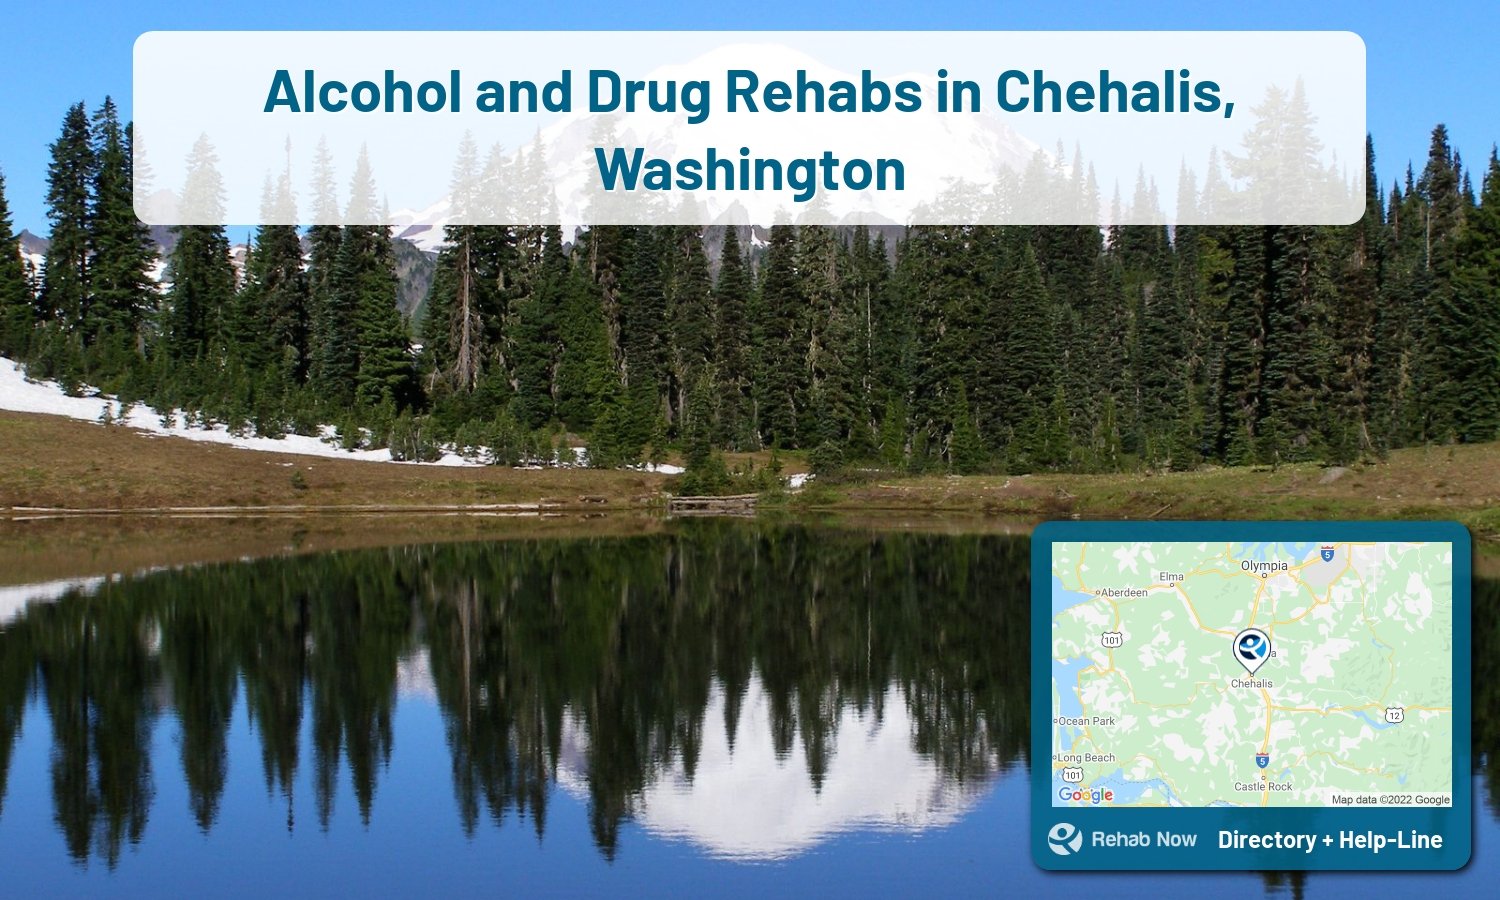 Let our expert counselors help find the best addiction treatment in Chehalis, Washington now with a free call to our hotline.